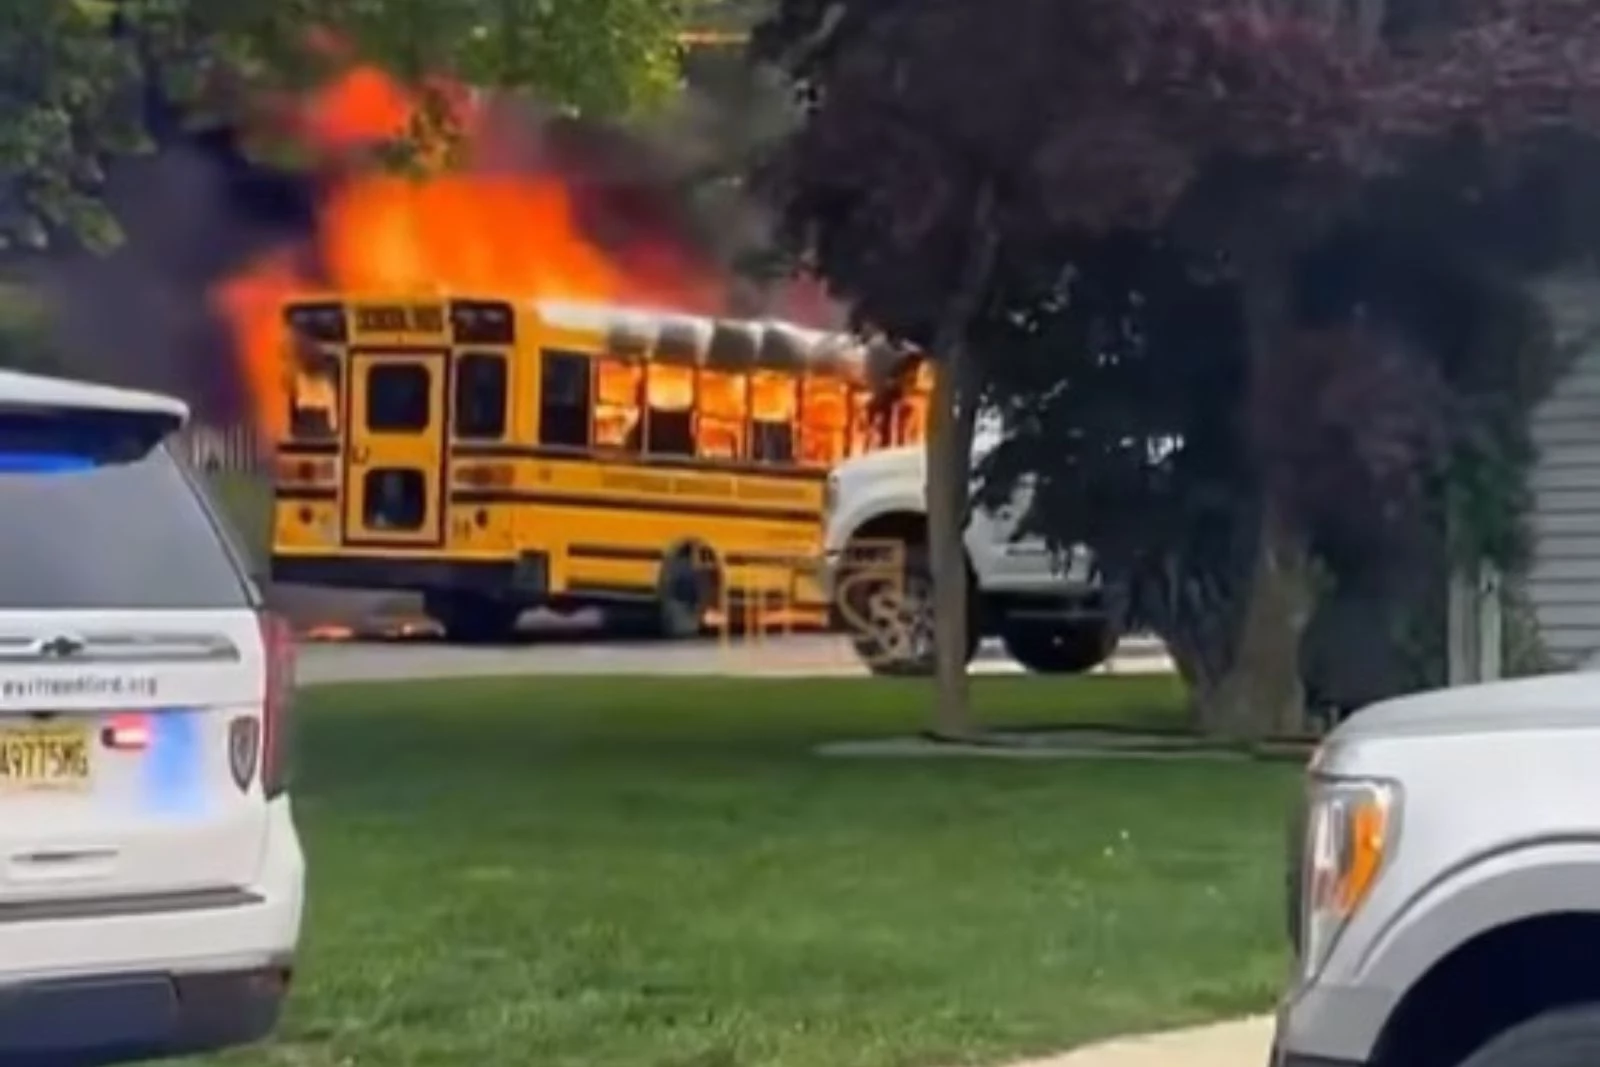 Sayreville, NJ school bus catches fire with students on board